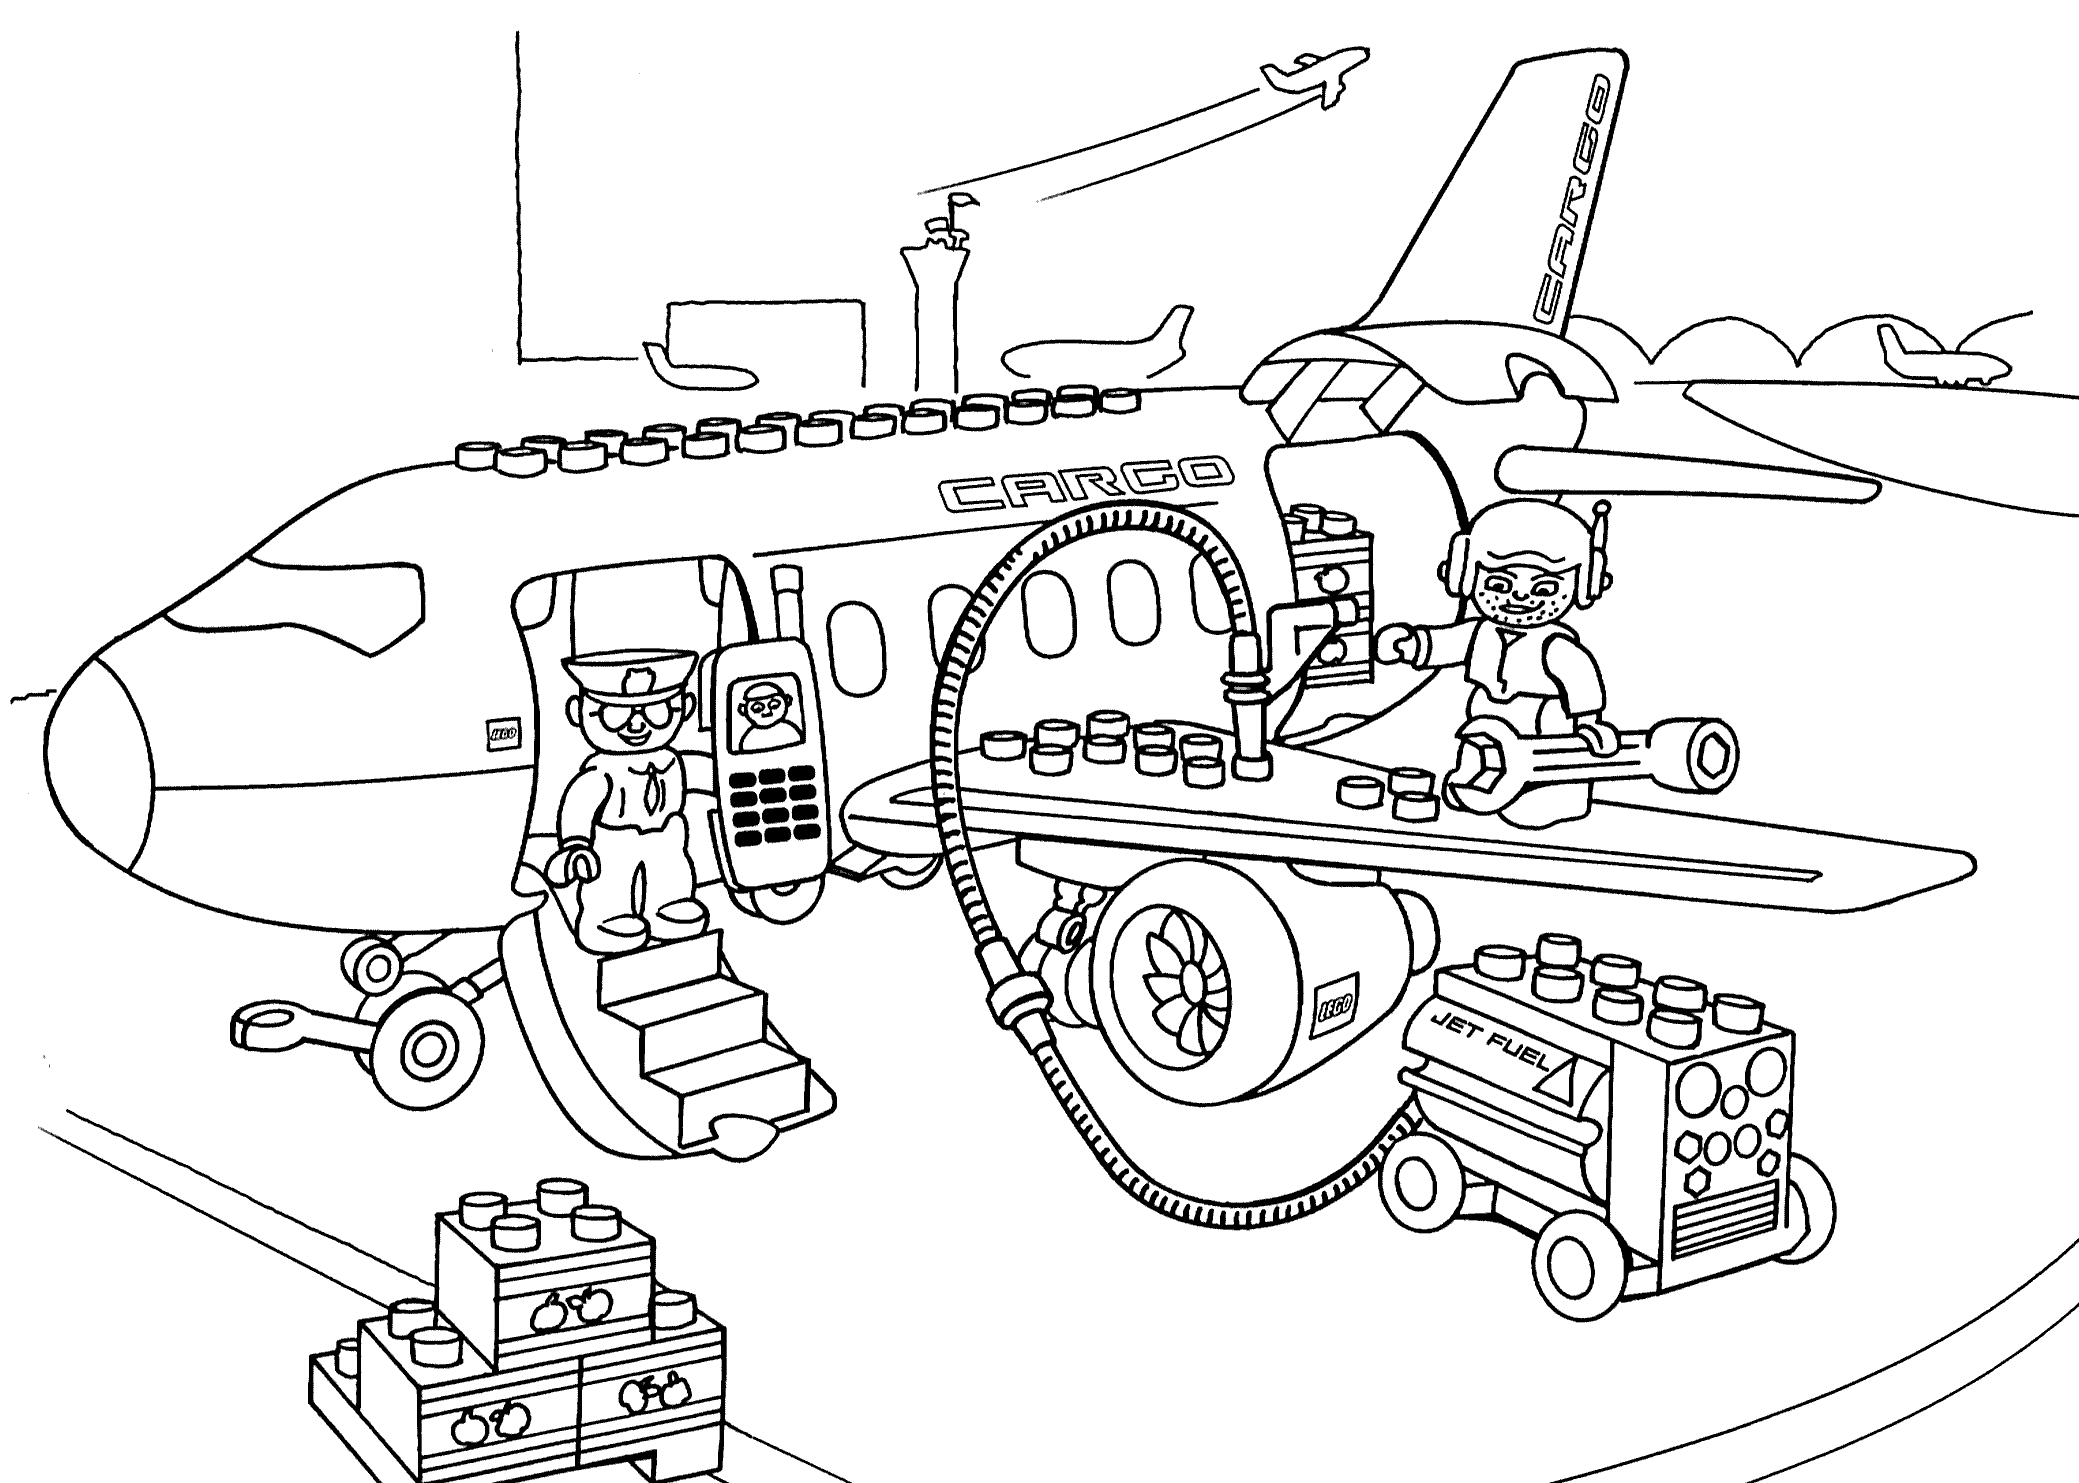 free printable lego tank coloring pages - VoteForVerde.com